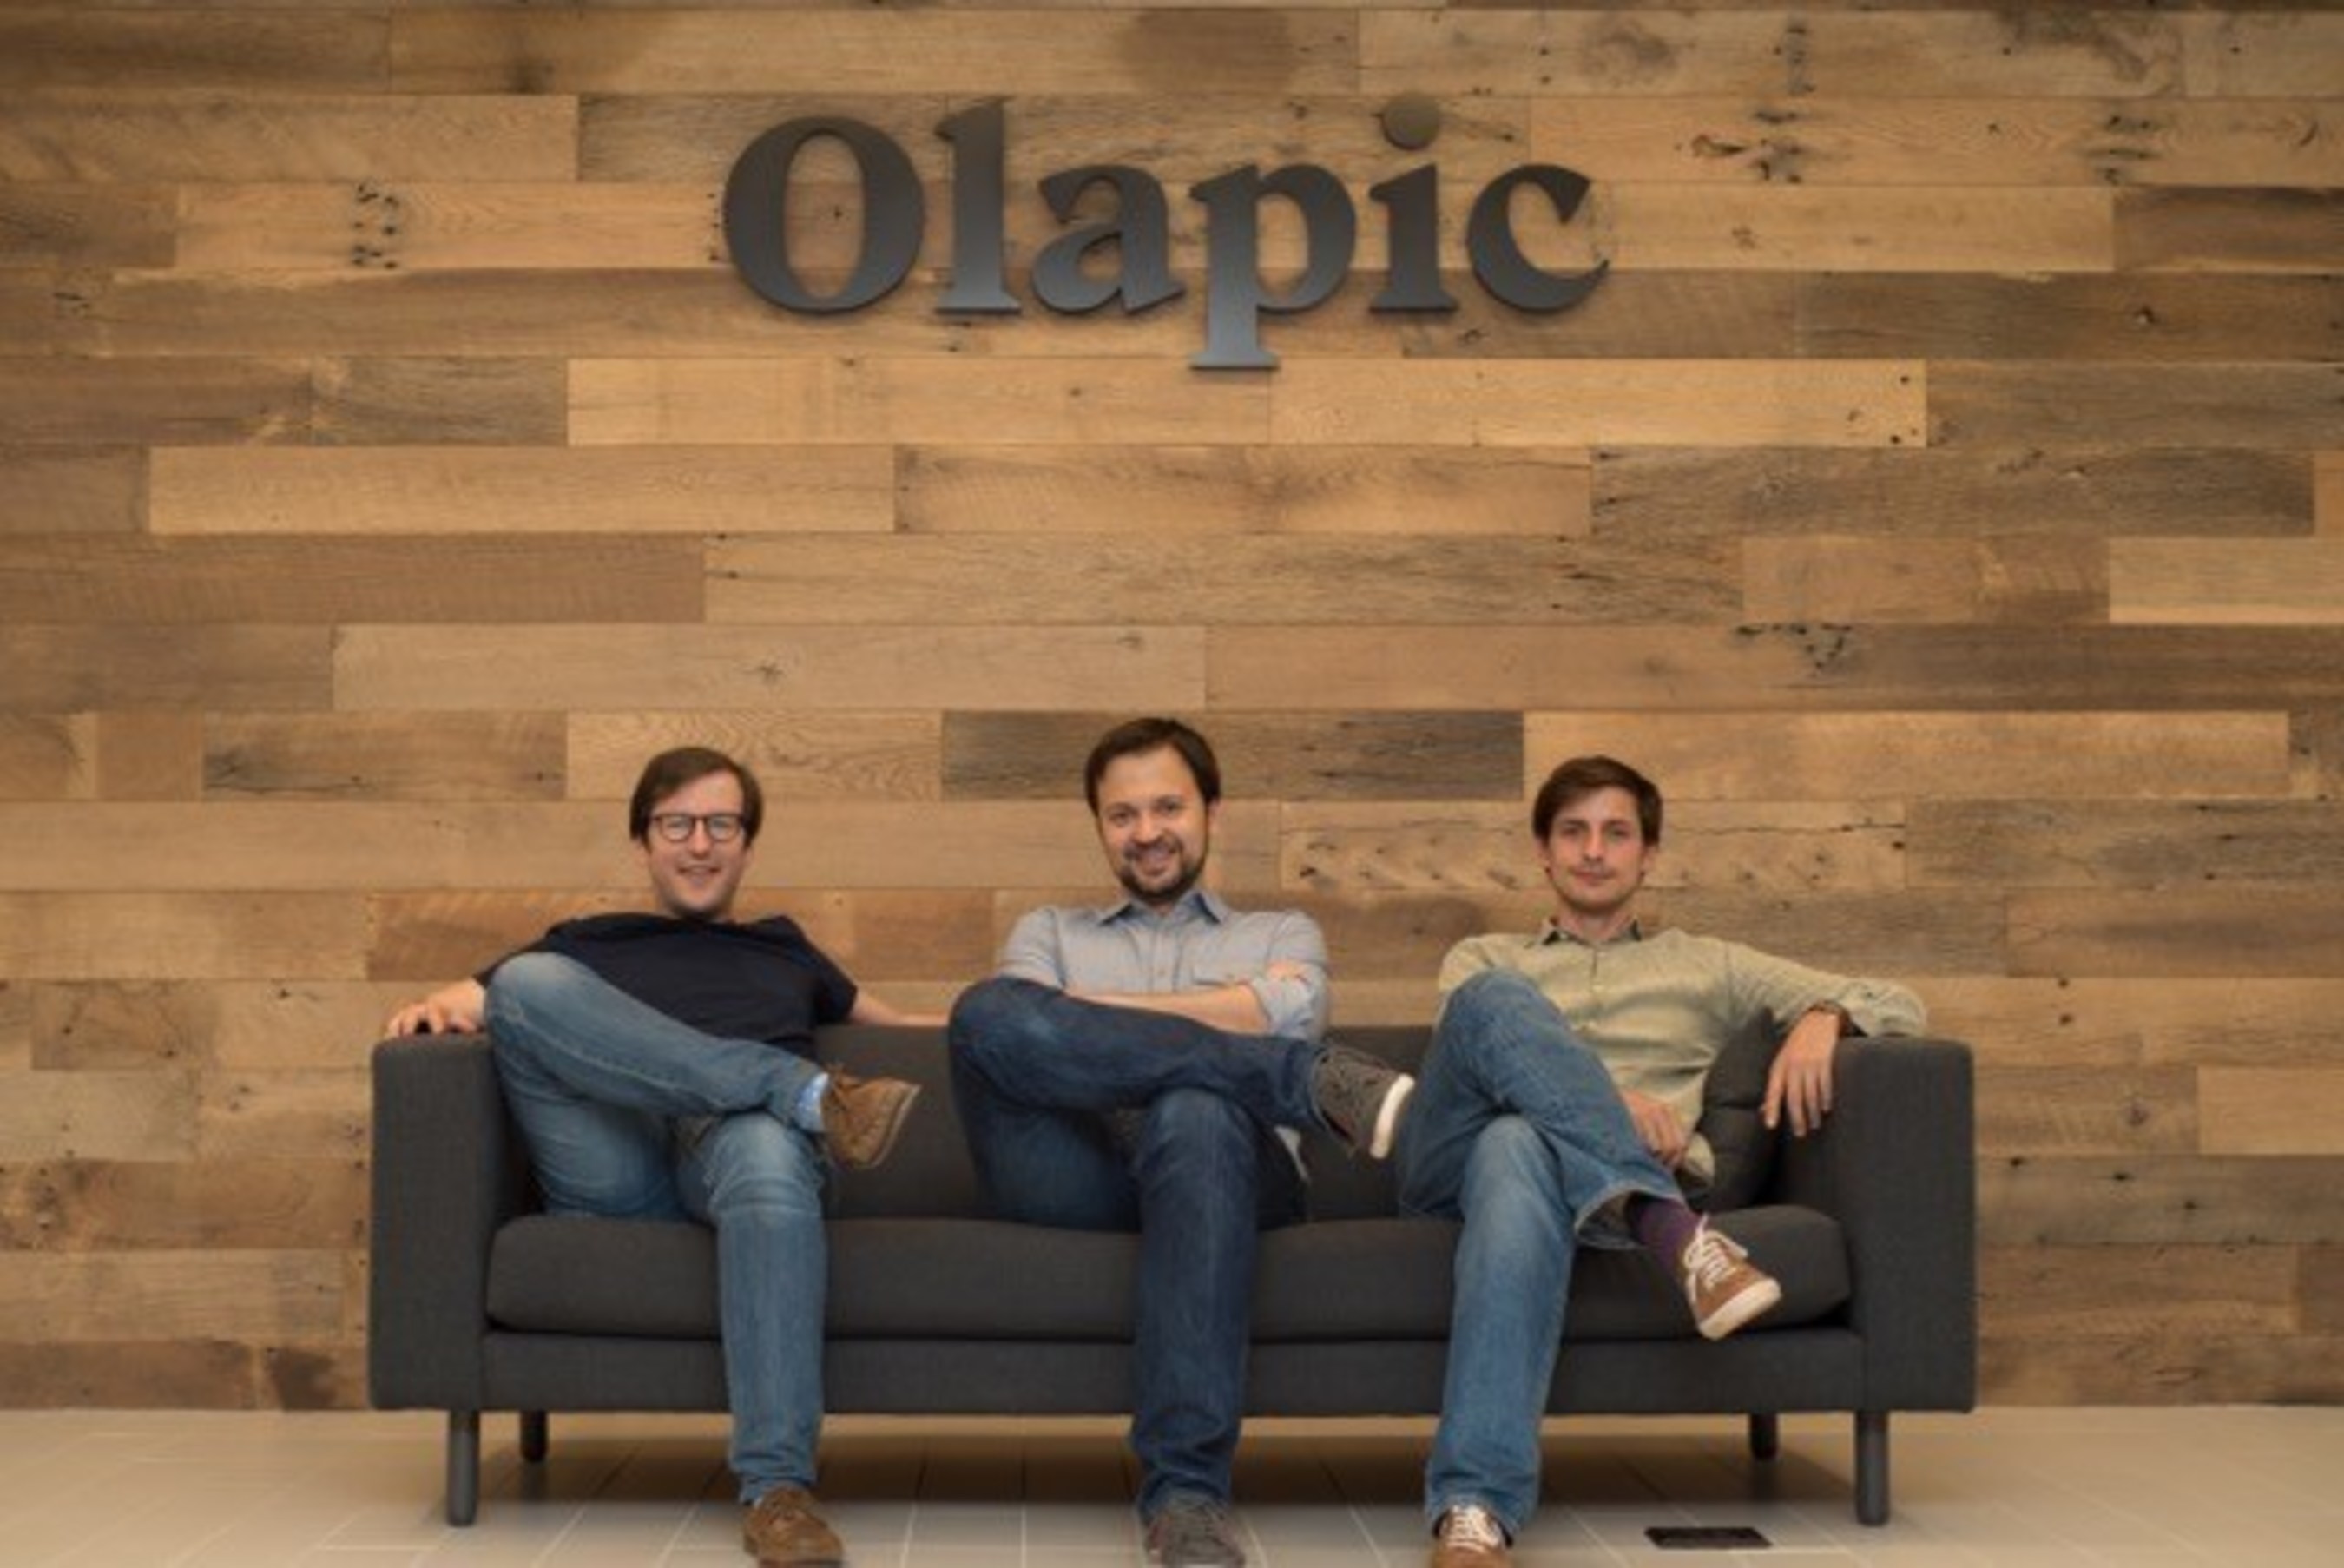 Left to Right: Olapic co-founders Pau Sabria, Luis Sanz and Jose de Cabo